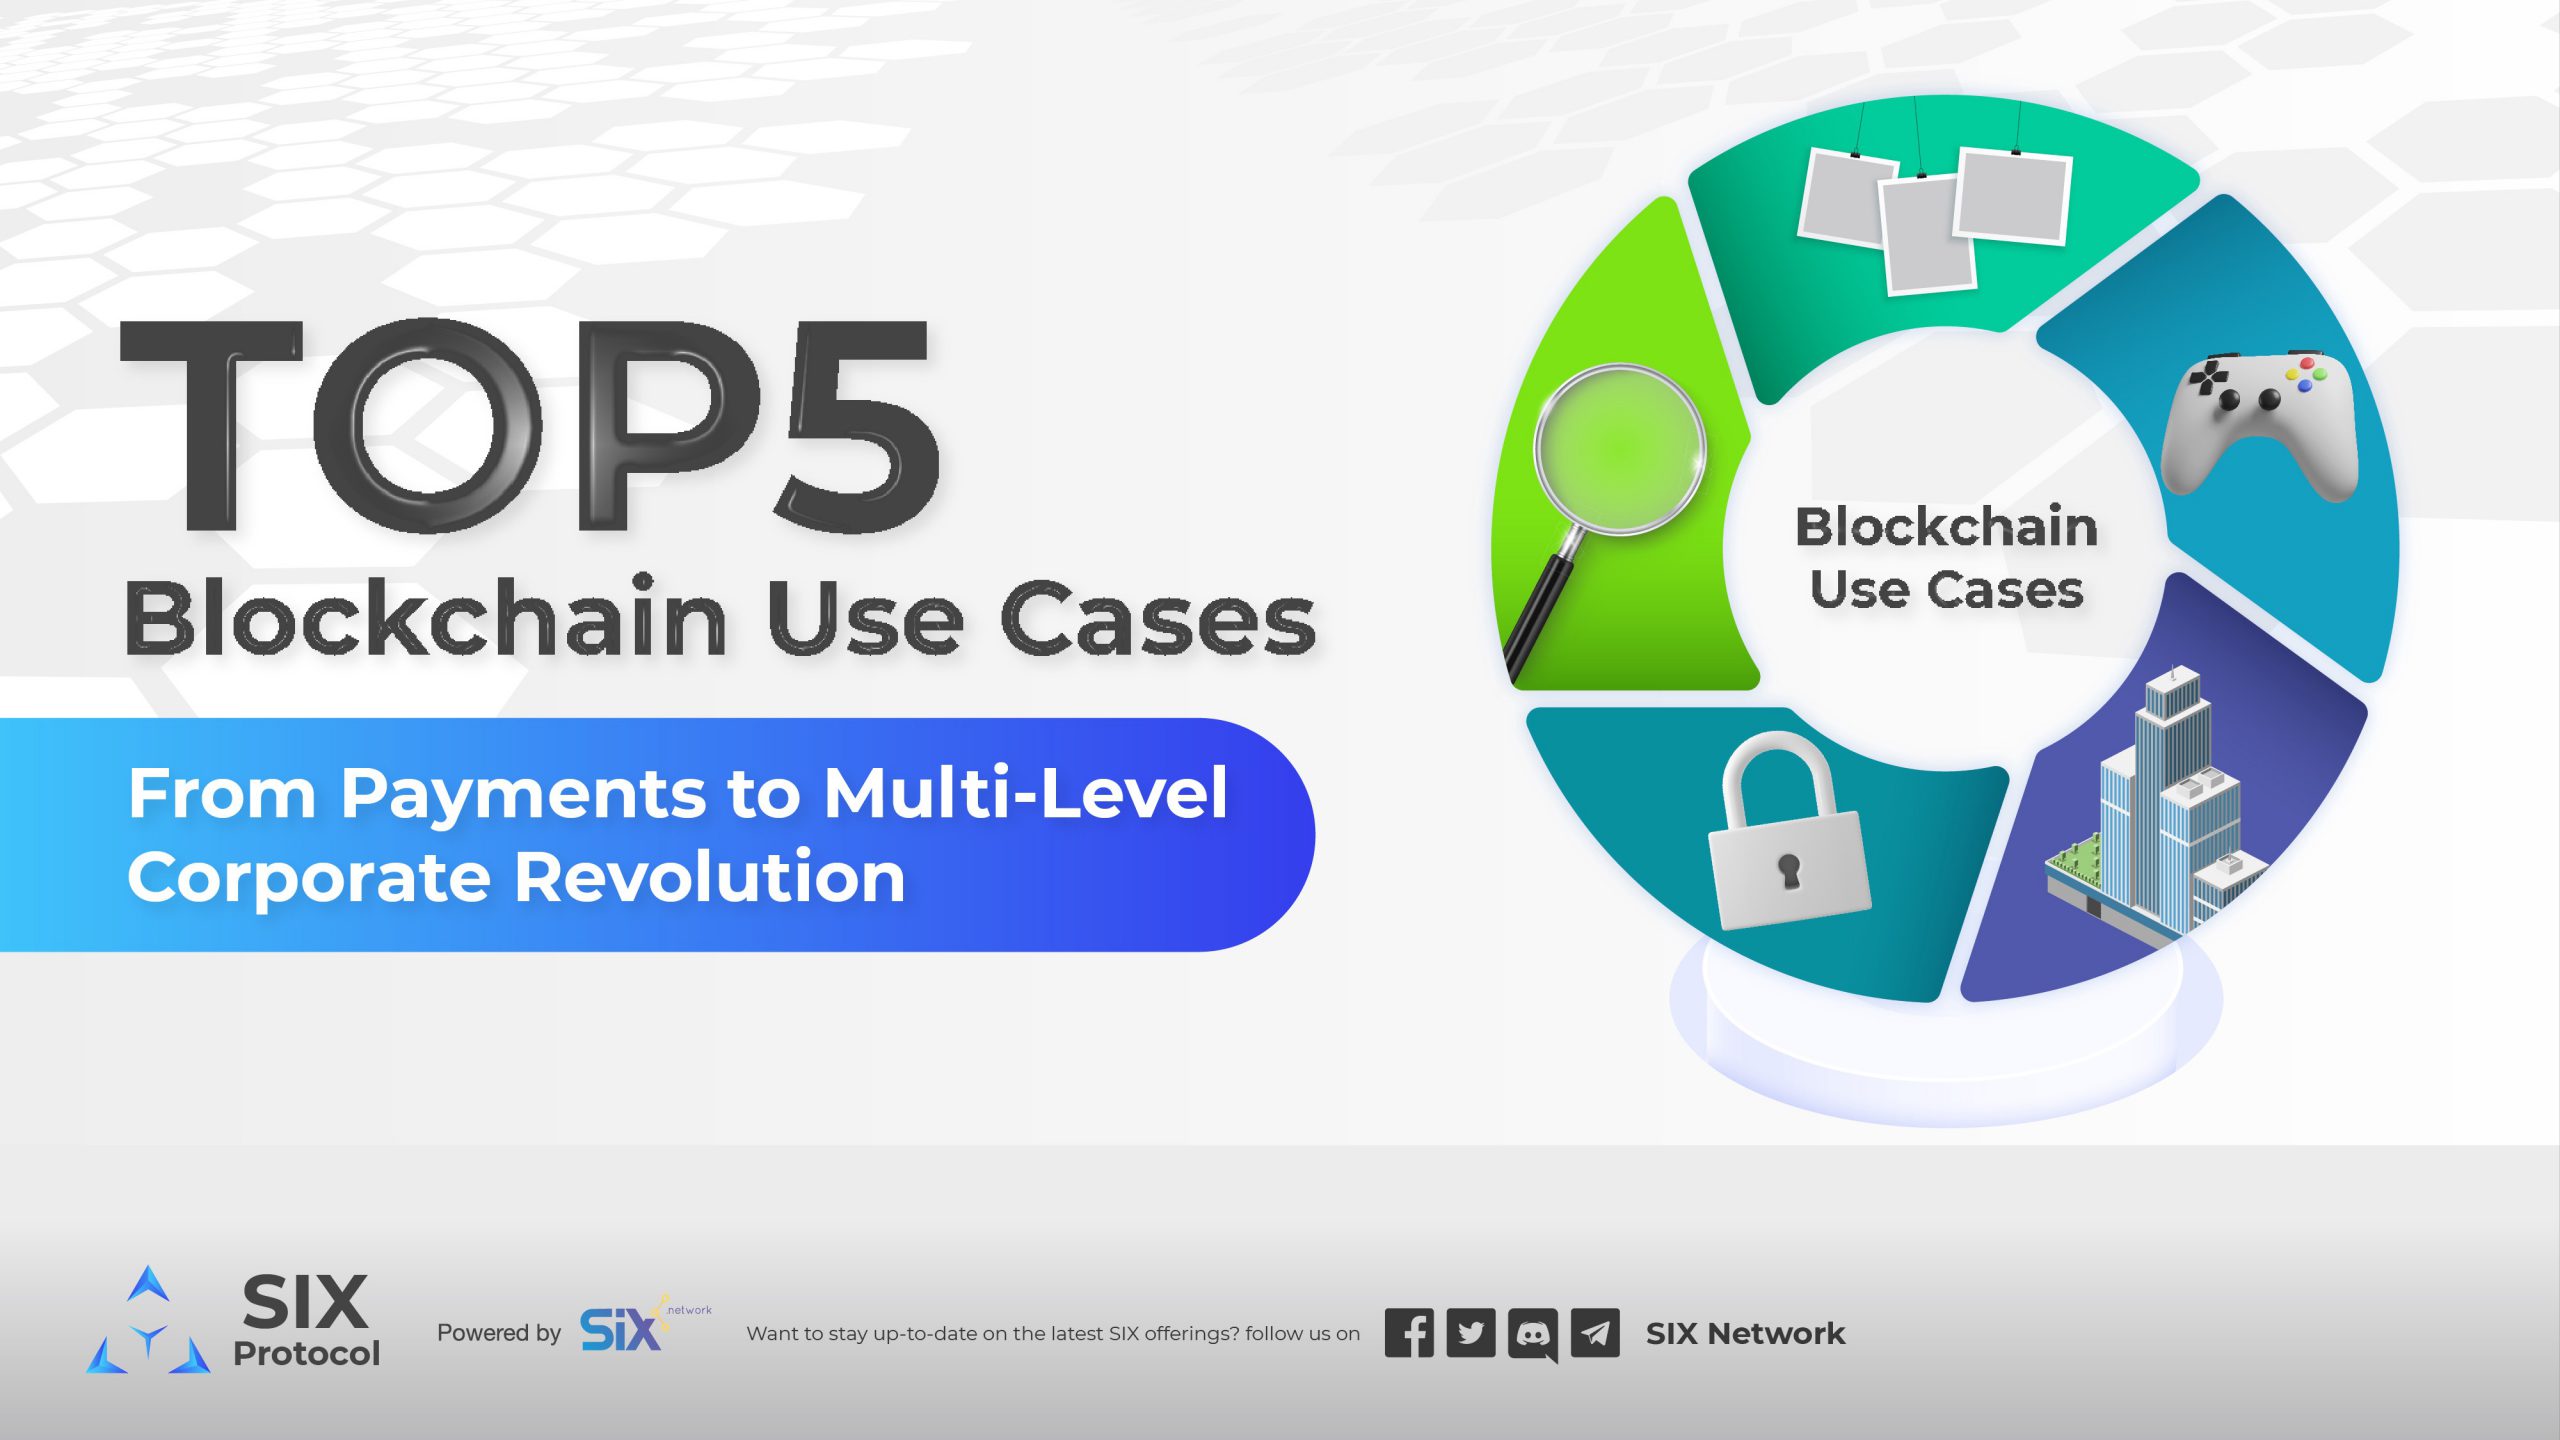 Top 5 Blockchain Use Cases: From Payments to Multi-Level Corporate Revolution